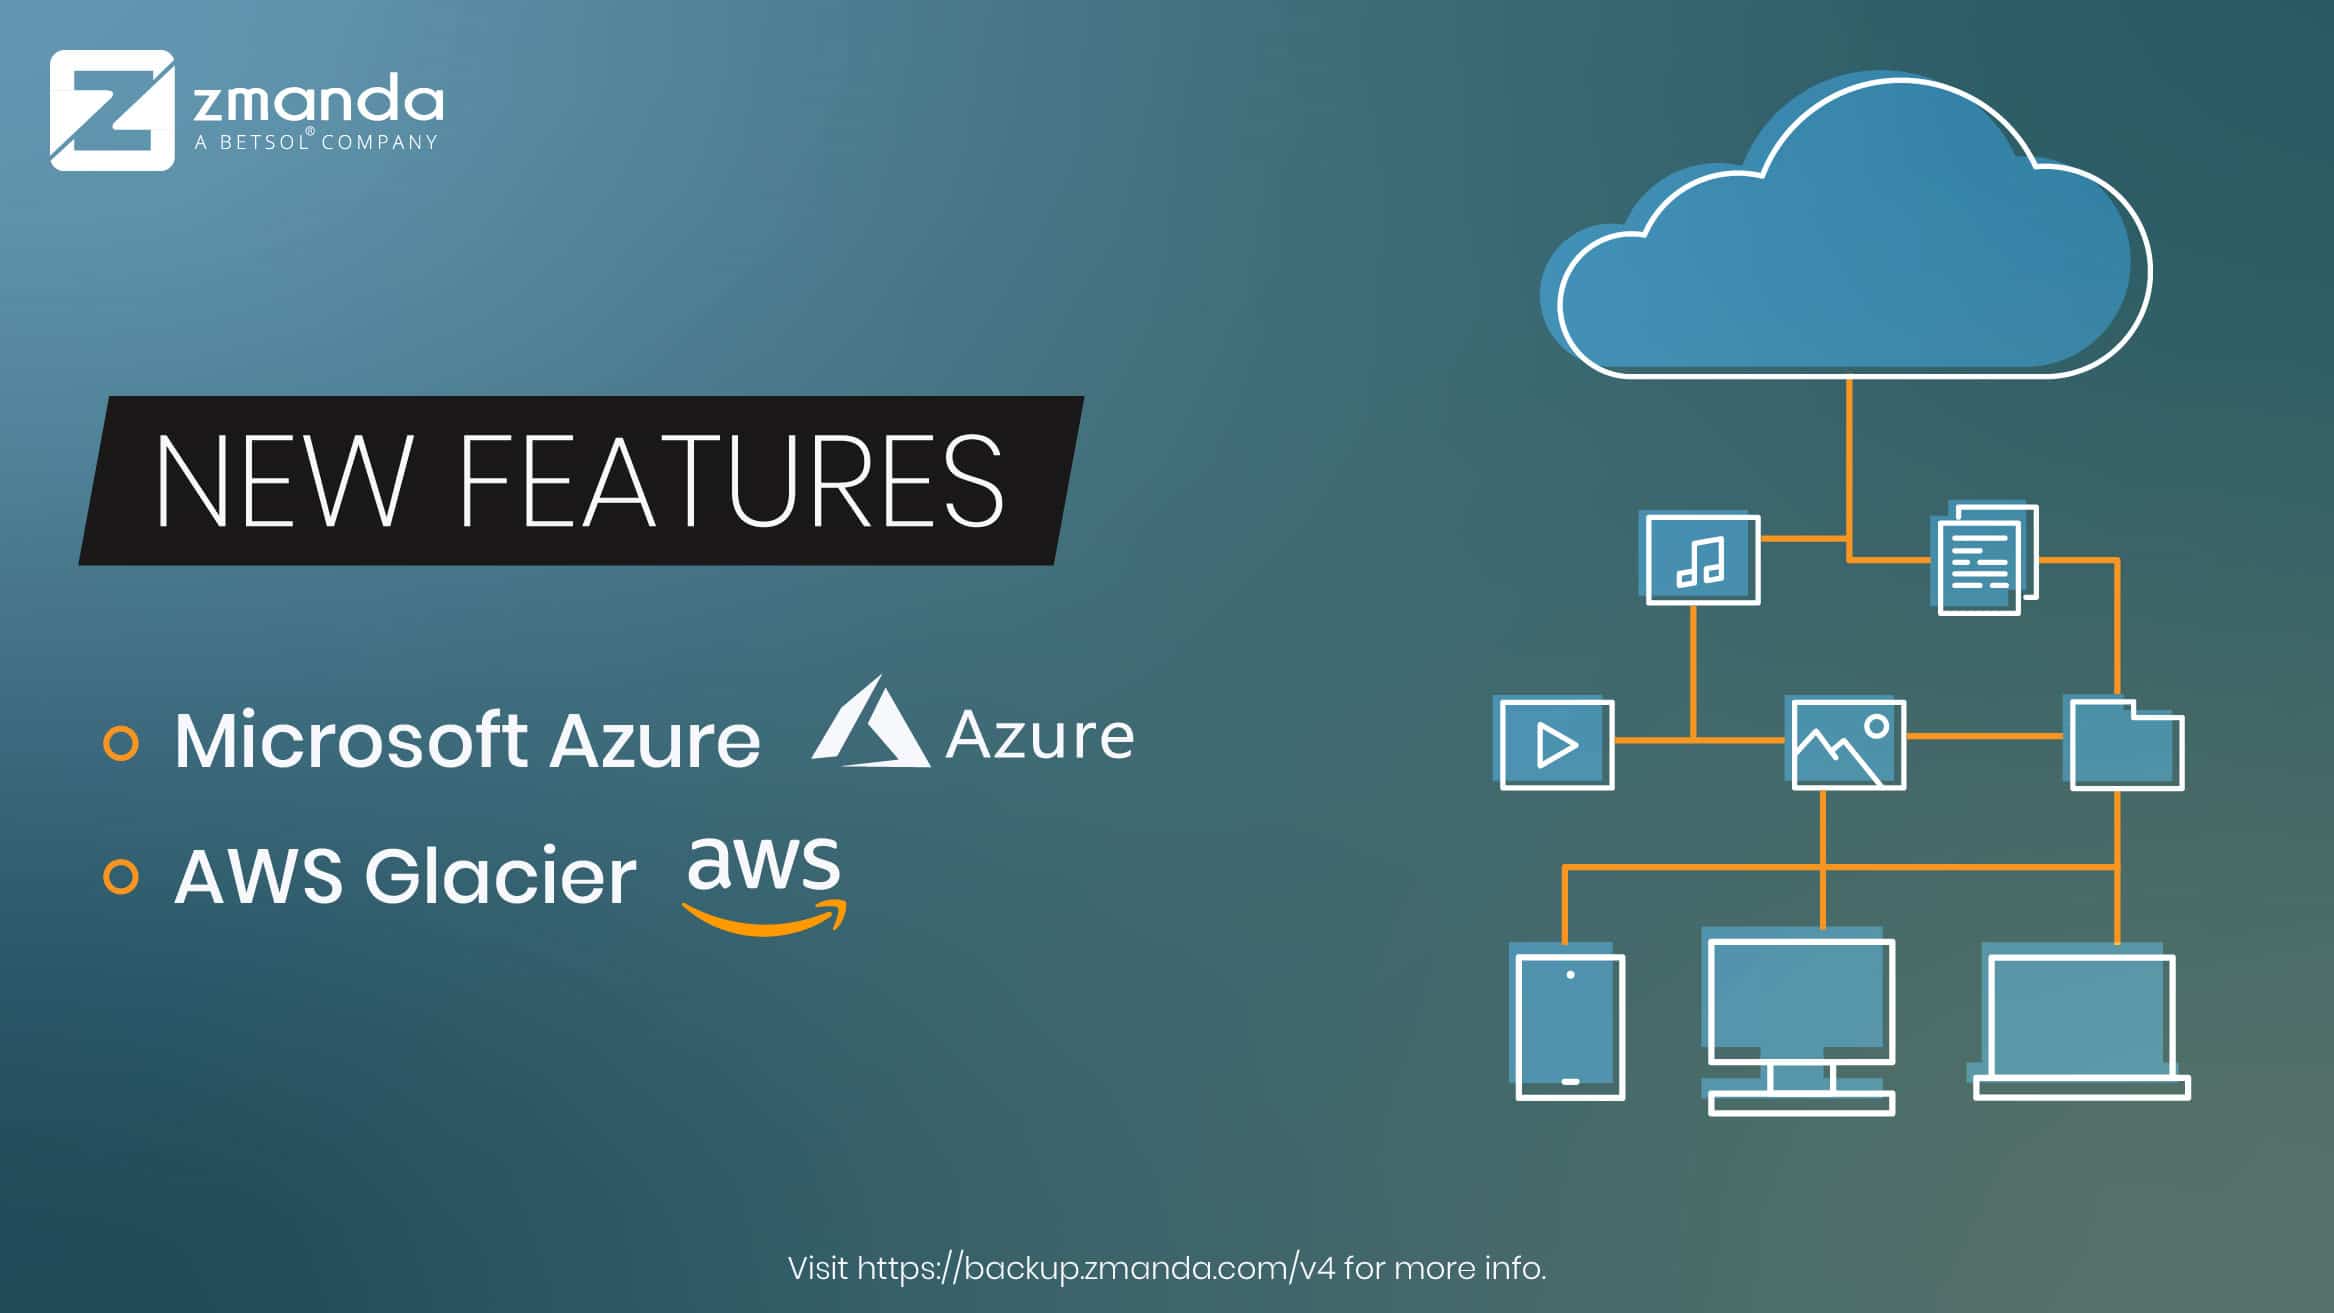 New Azure and AWS Support Features Coming to Zmanda 4.0